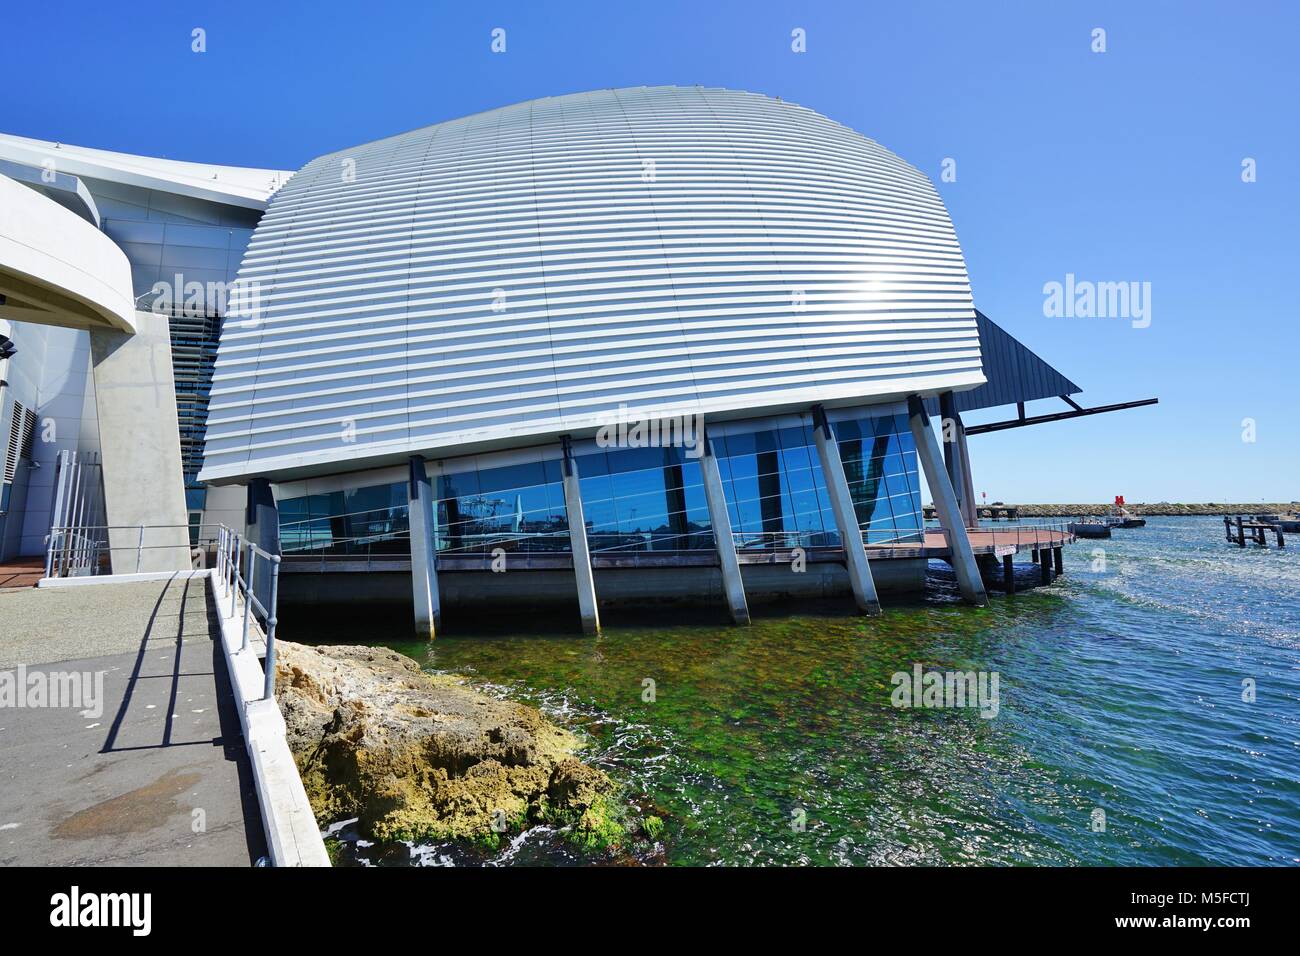 View of the Western Australian Maritime Museum located in the port of Fremantle near Perth, Western Australia Stock Photo